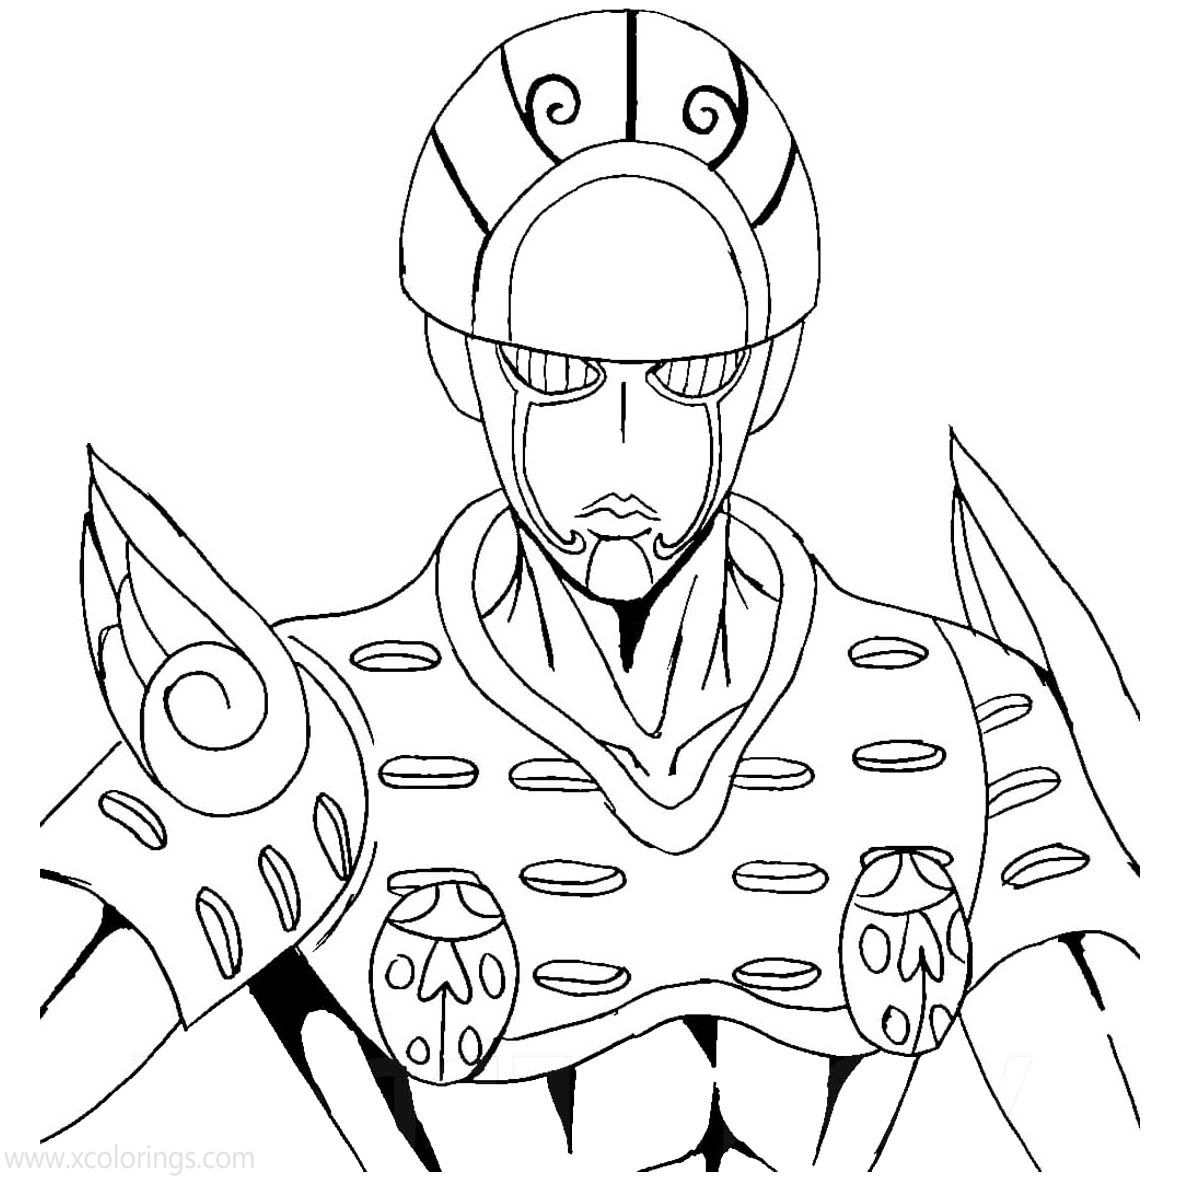 Free JoJo's Bizarre Adventure Coloring Pages Gold Experience printable